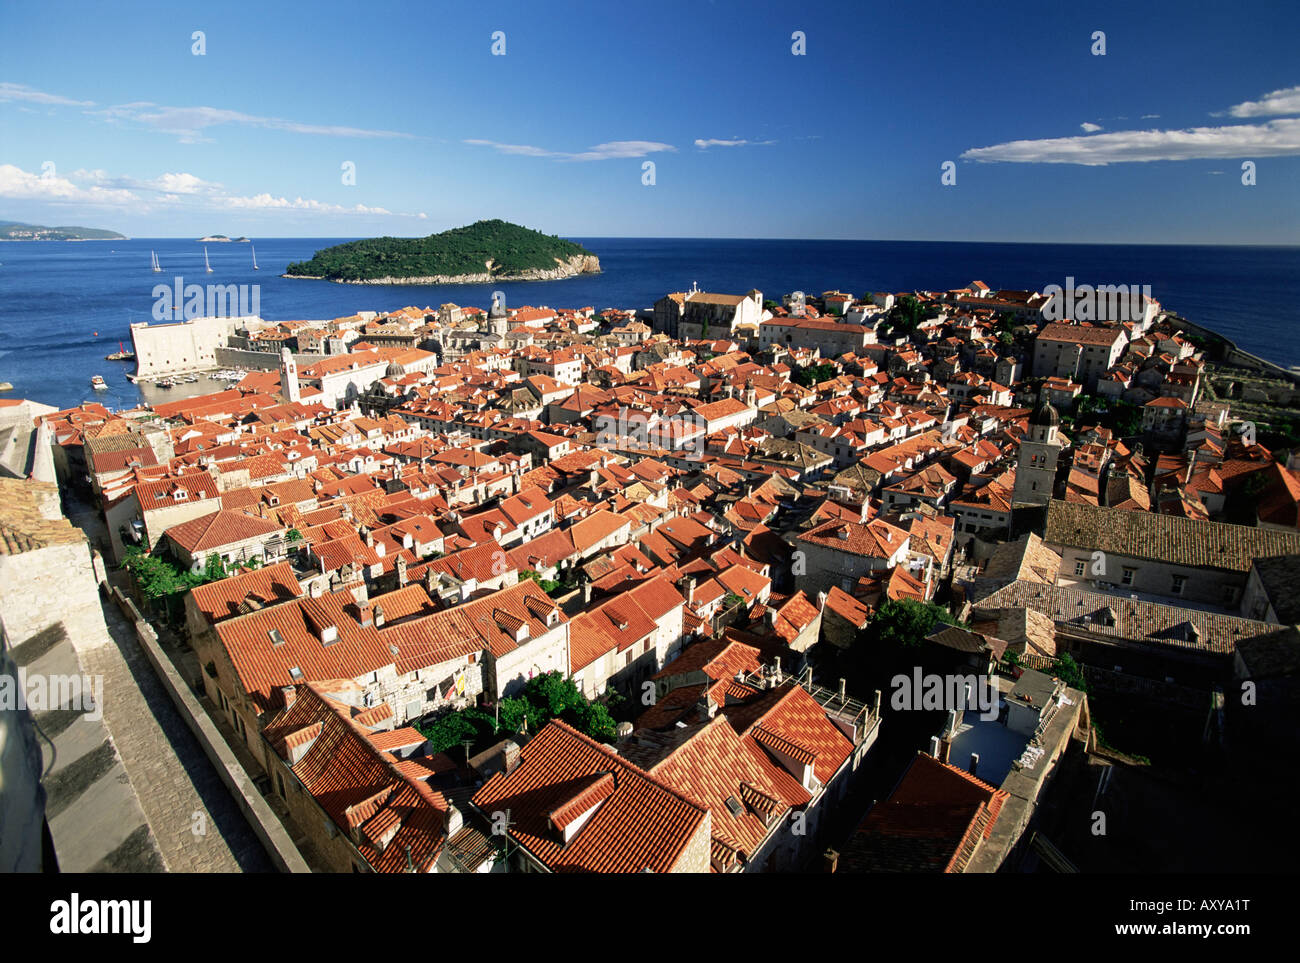 Elevated view of Dubrovnik from the city walls, Dubrovnik, UNESCO World Heritage Site, Dalmatia, Croatia, Europe Stock Photo